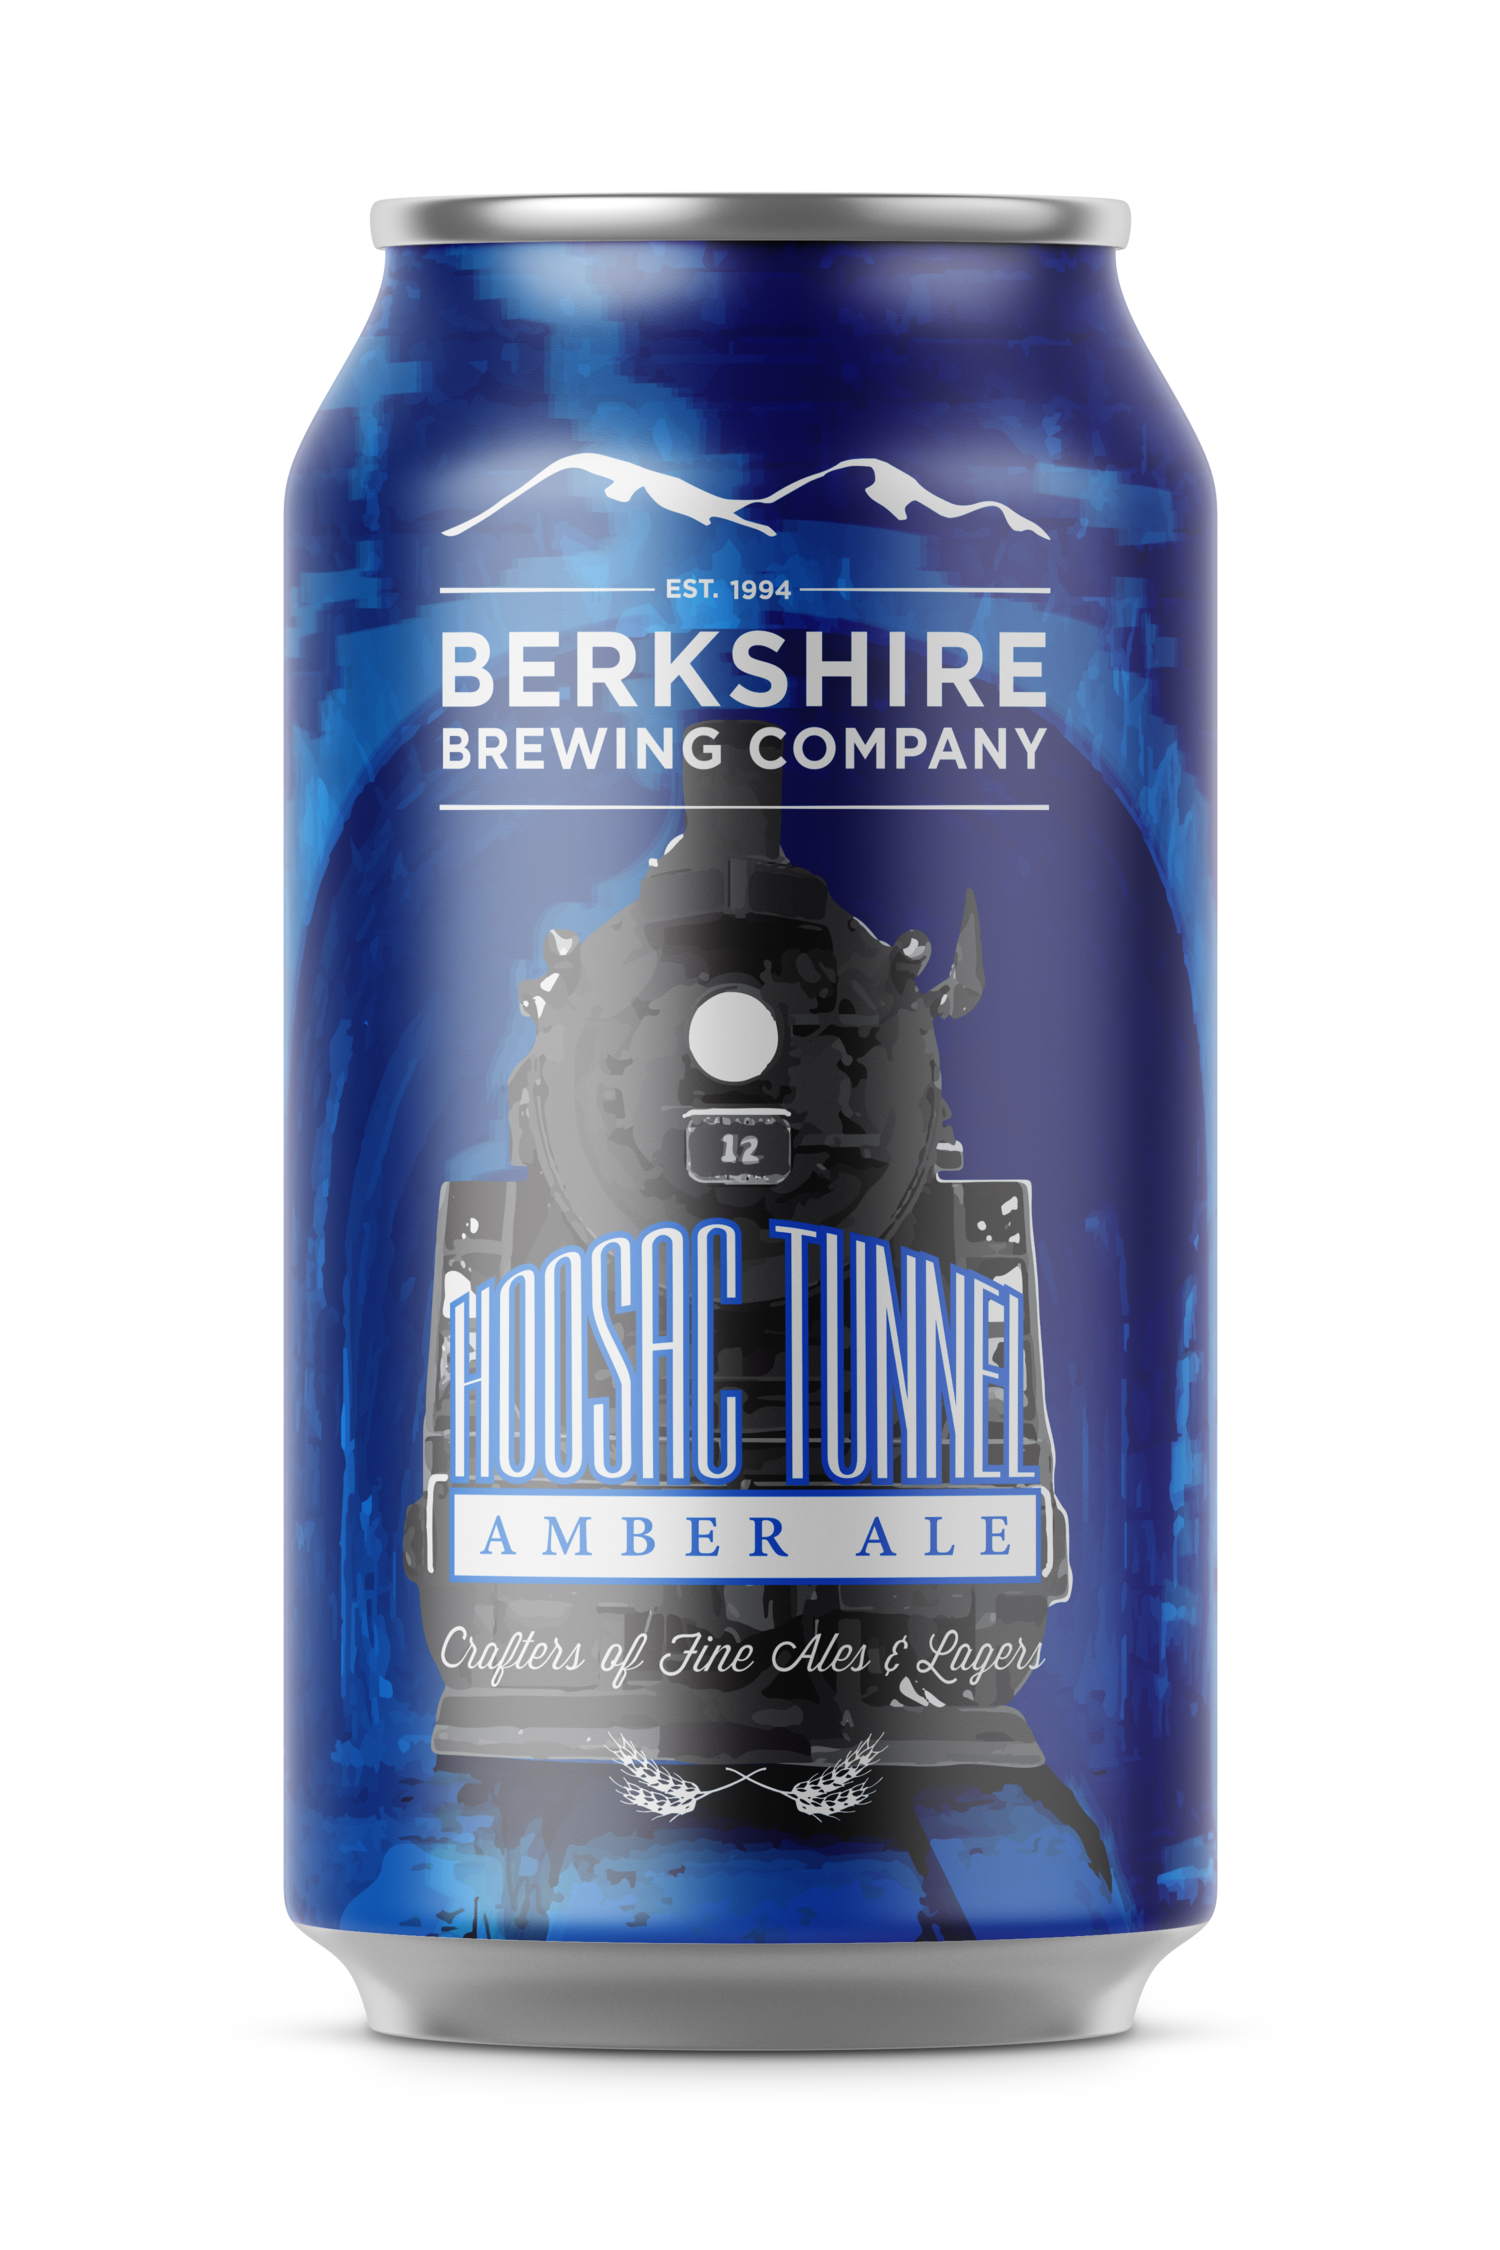 Hoosac Tunnel by Berkshire Brewing Company